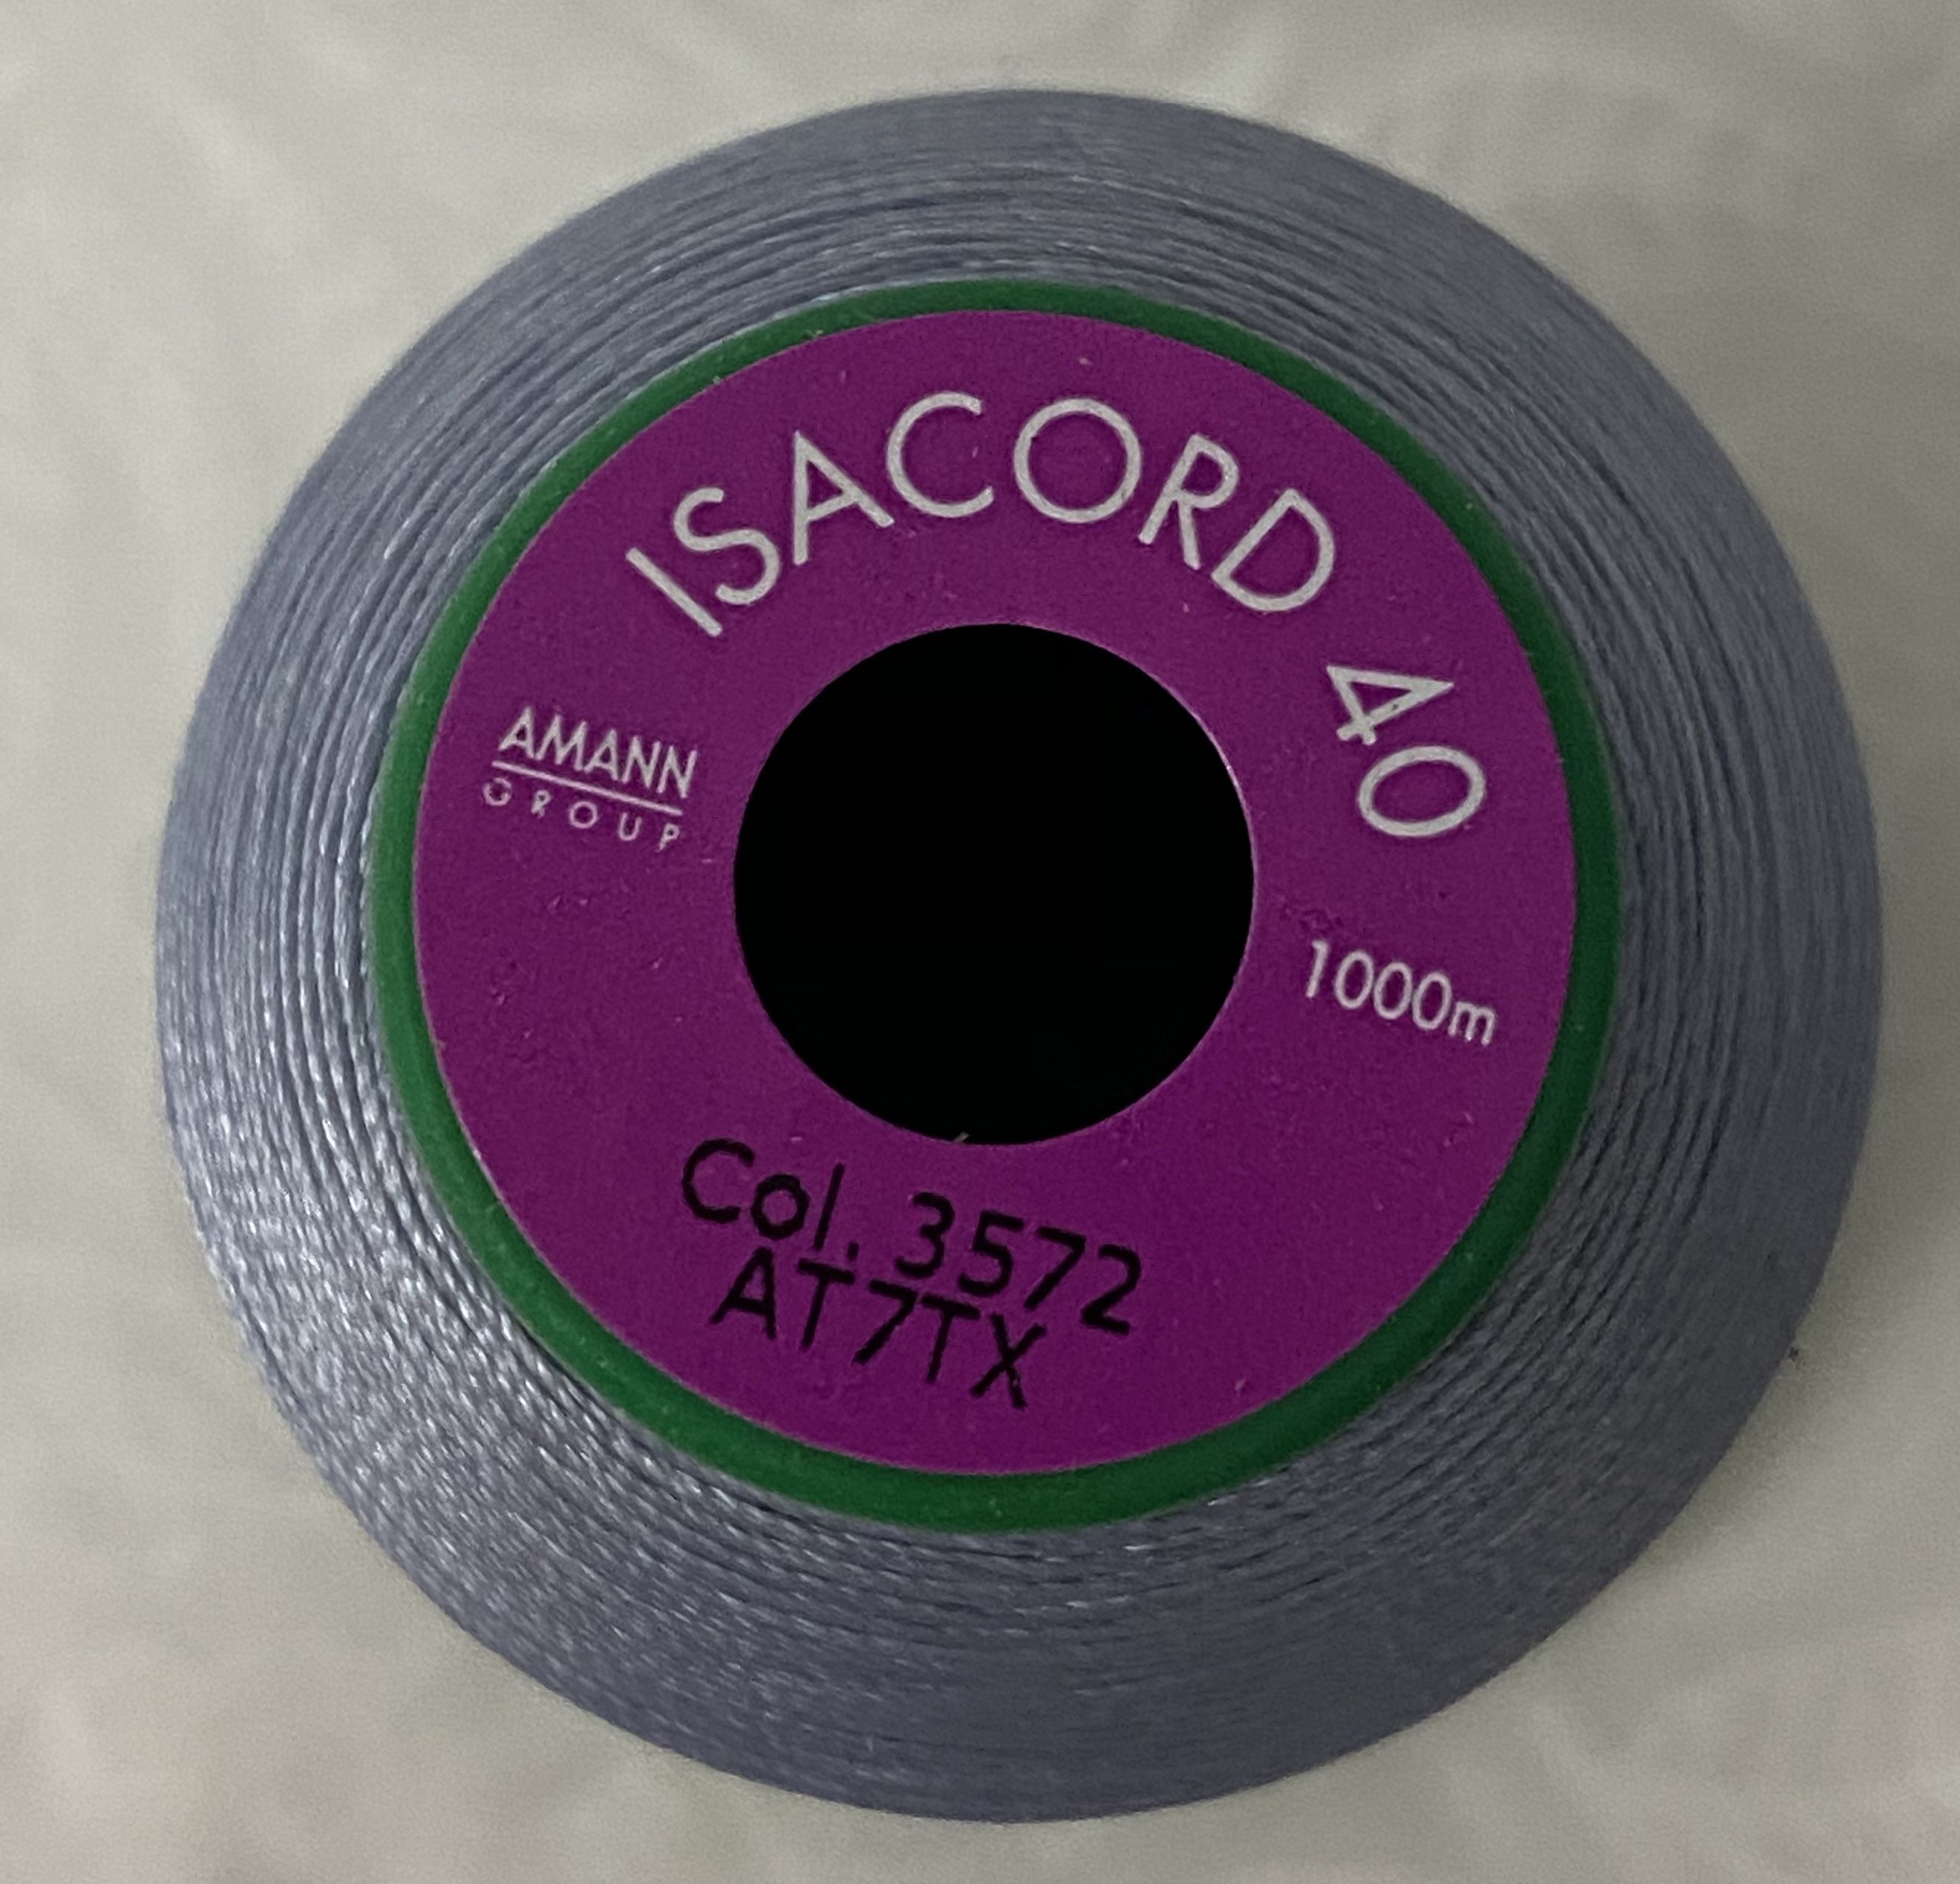 ISACORD 40 #3572 SUMMER GREY 1000m Machine Embroidery Sewing Thread